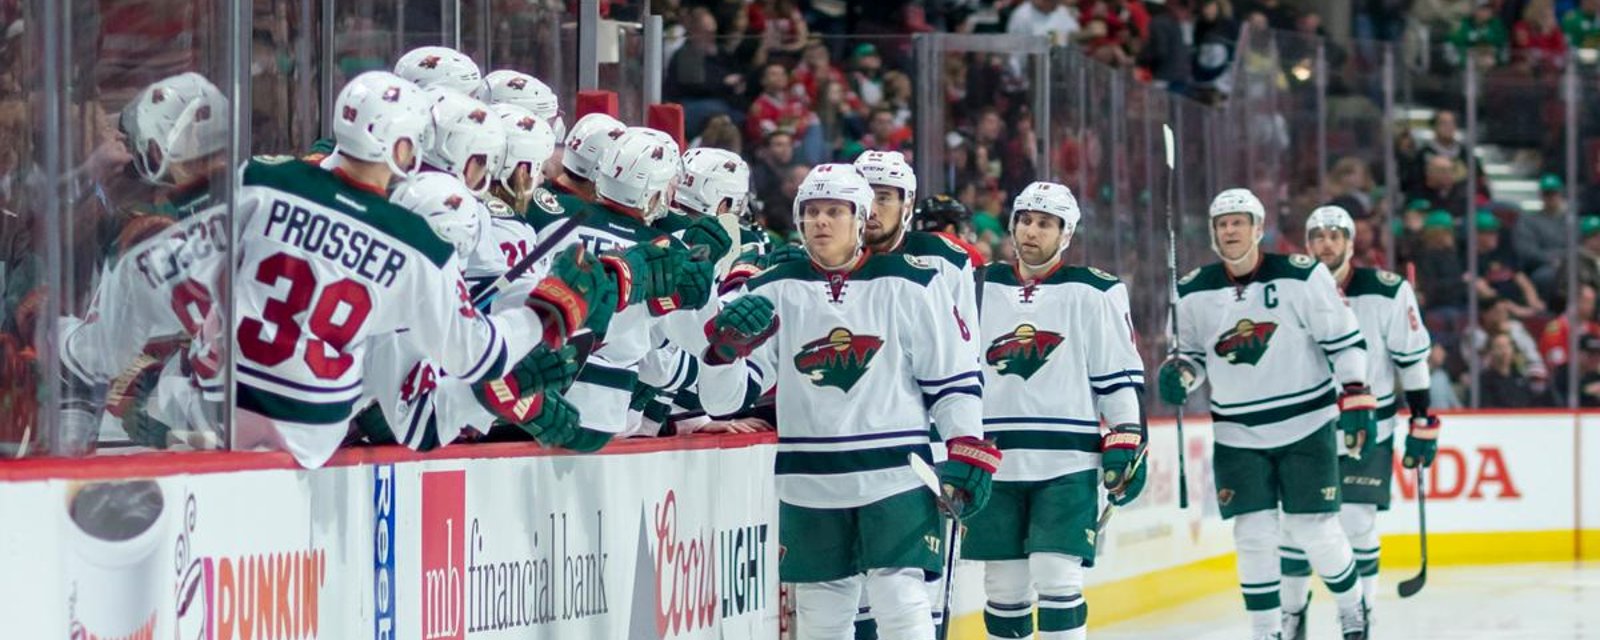 Wild first round matchup preview! 